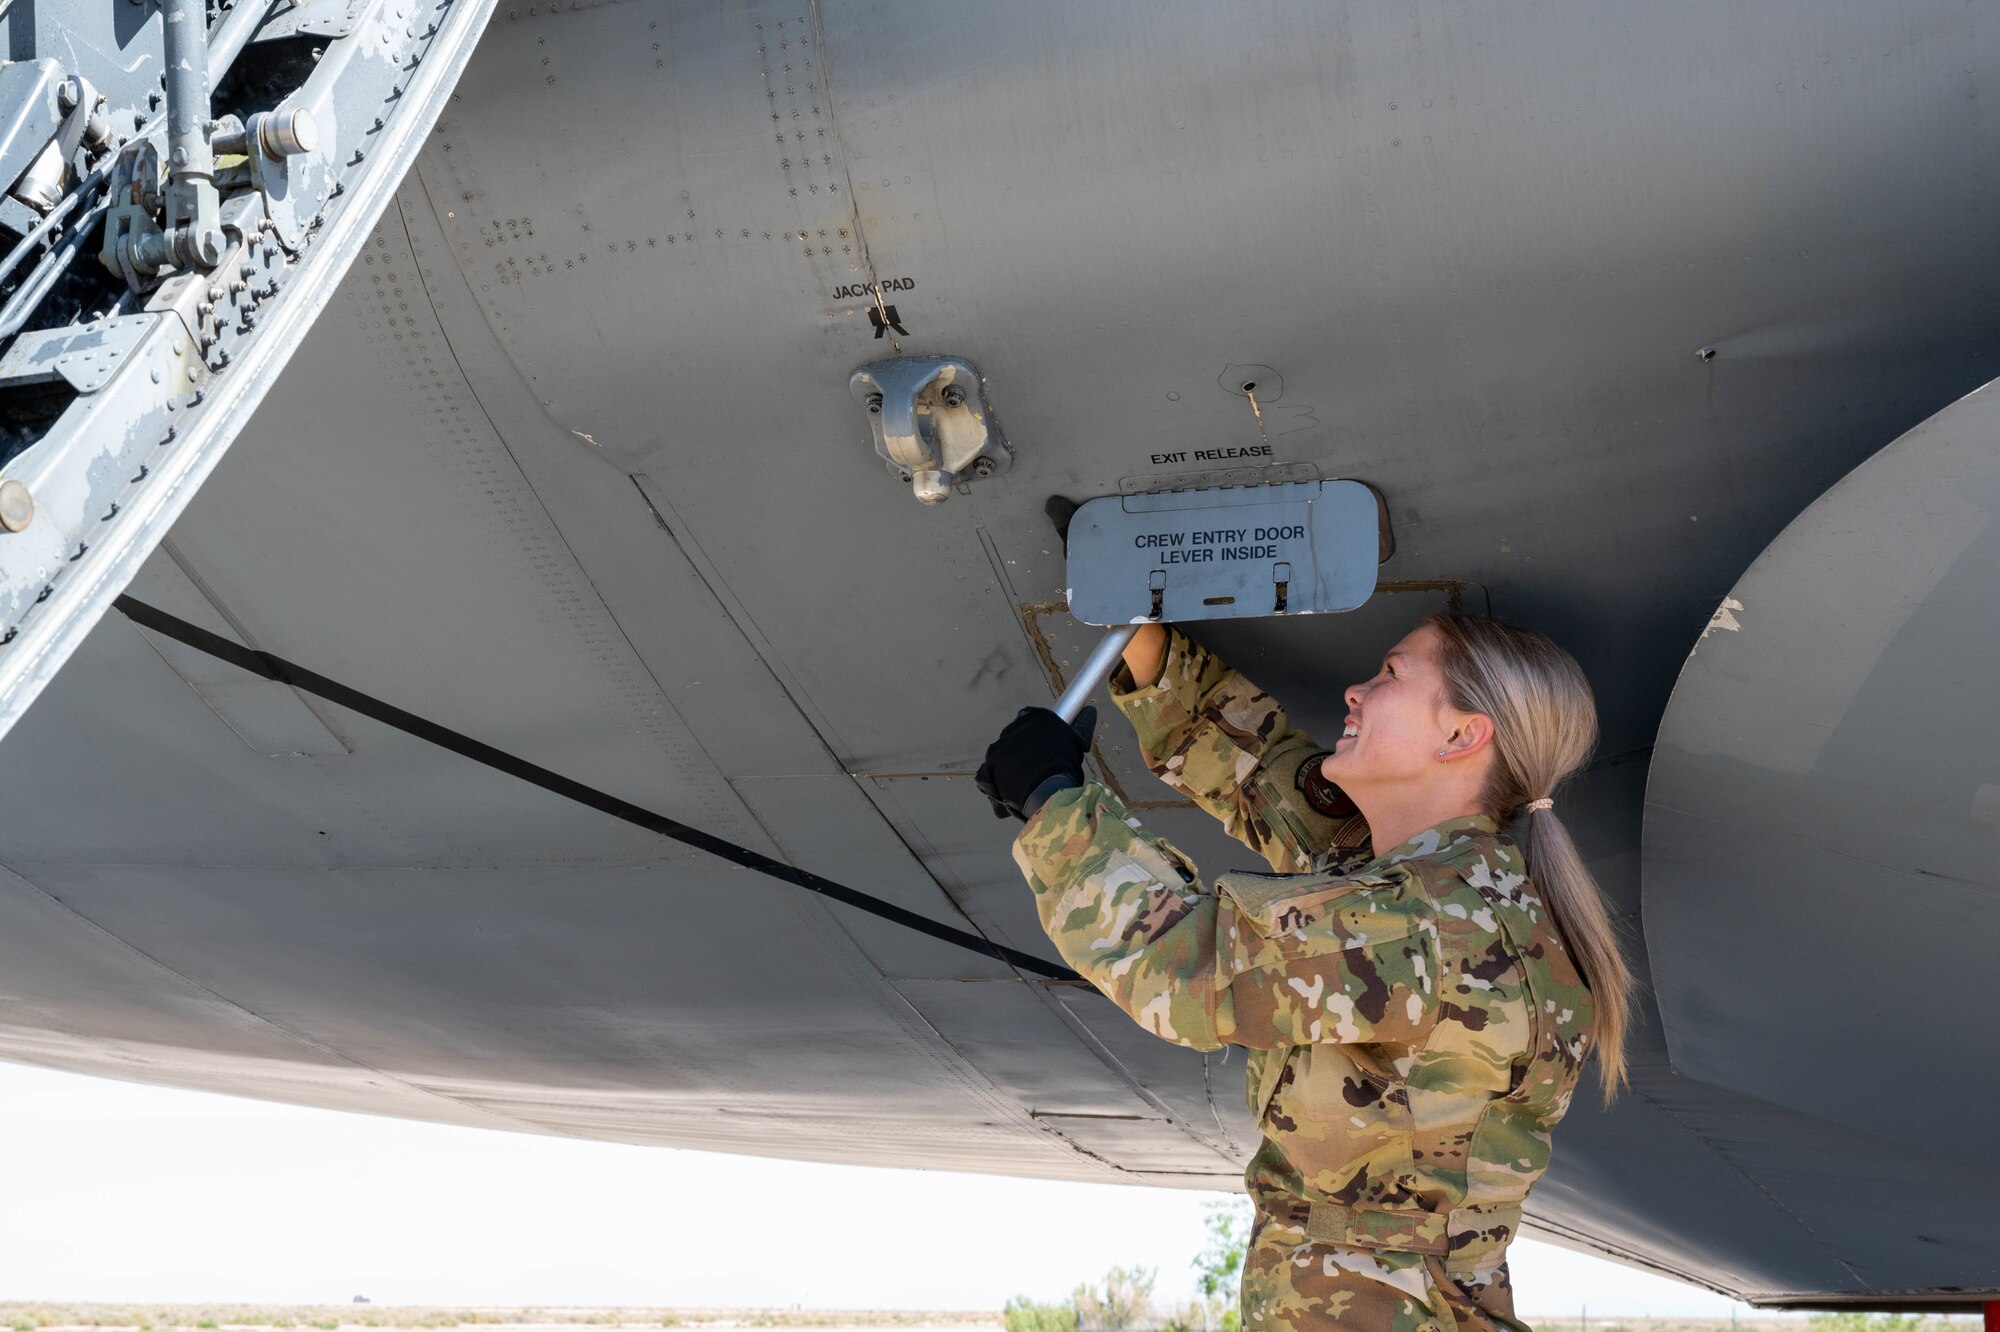 Airman 1st Class Rebecca Reimer, 9th Airlift Squadron loadmaster student, opens the crew entry door panel of a Dover Air Force Base C-5M Super Galaxy during a Major Command Service Tail Trainer exercise at Holloman AFB, New Mexico, June 2, 2021. The 9th AS performs MSTTs to expedite upgrade and qualification training for C-5M loadmasters and flight engineers. Of the 350 tasks needed to be a fully qualified loadmaster, roughly half can be completed during an MSTT, reducing training time by up to 35 days. (U.S. Air Force photo by Senior Airman Faith Schaefer)